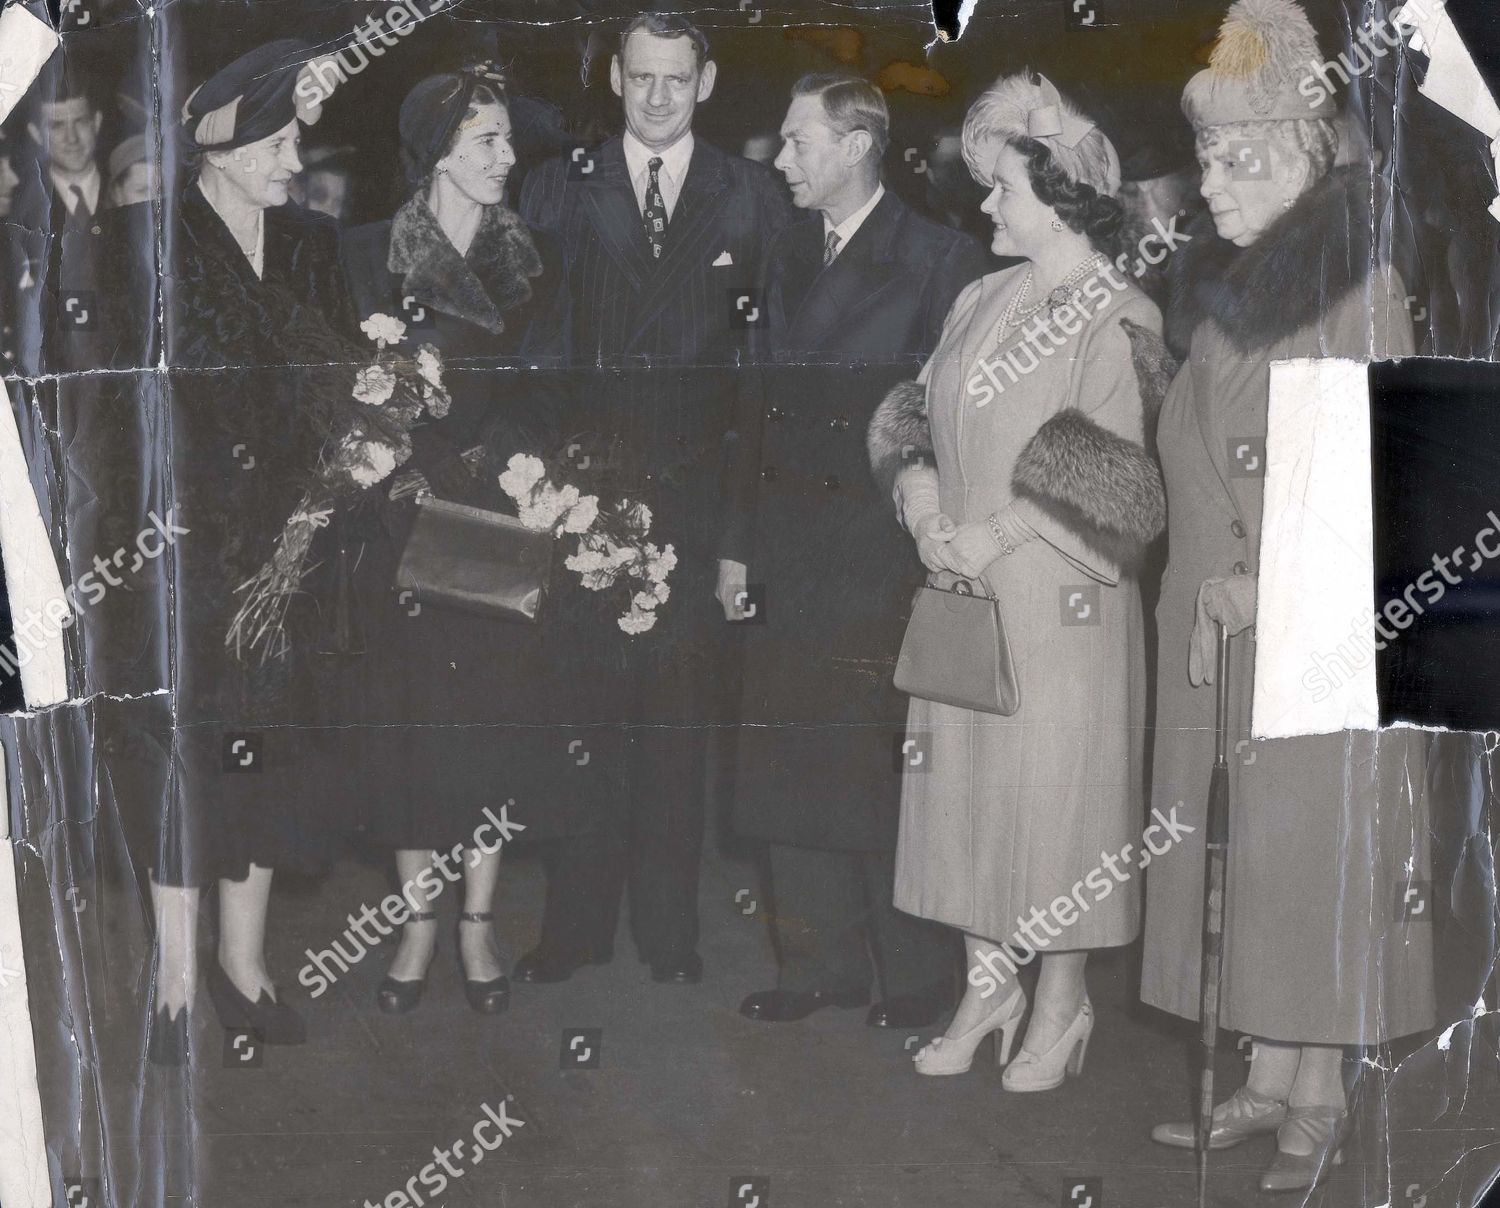 king-george-vi-and-queen-elizabeth-queen-mother-october-1948-london-king-george-with-queen-elizabeth-and-queen-mary-of-england-greeted-king-frederick-and-queen-ingrid-of-denmark-who-arrived-with-the-queen-mother-queen-alexandrine-at-liverpool-stre-shutterstock-editorial-883051a.jpg